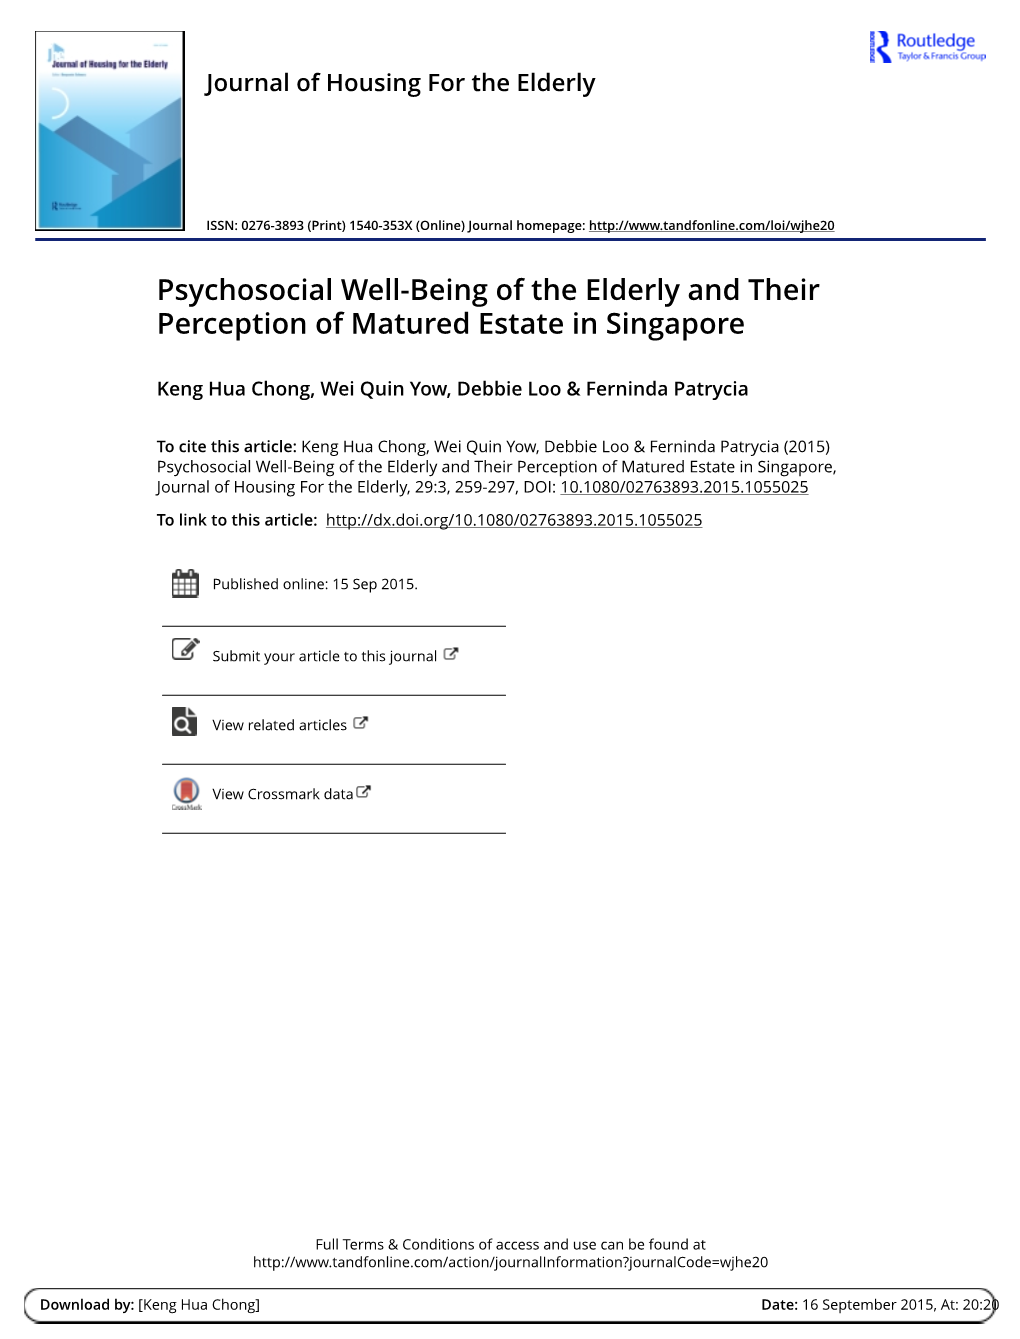 Psychosocial Well-Being of the Elderly and Their Perception of Matured Estate in Singapore